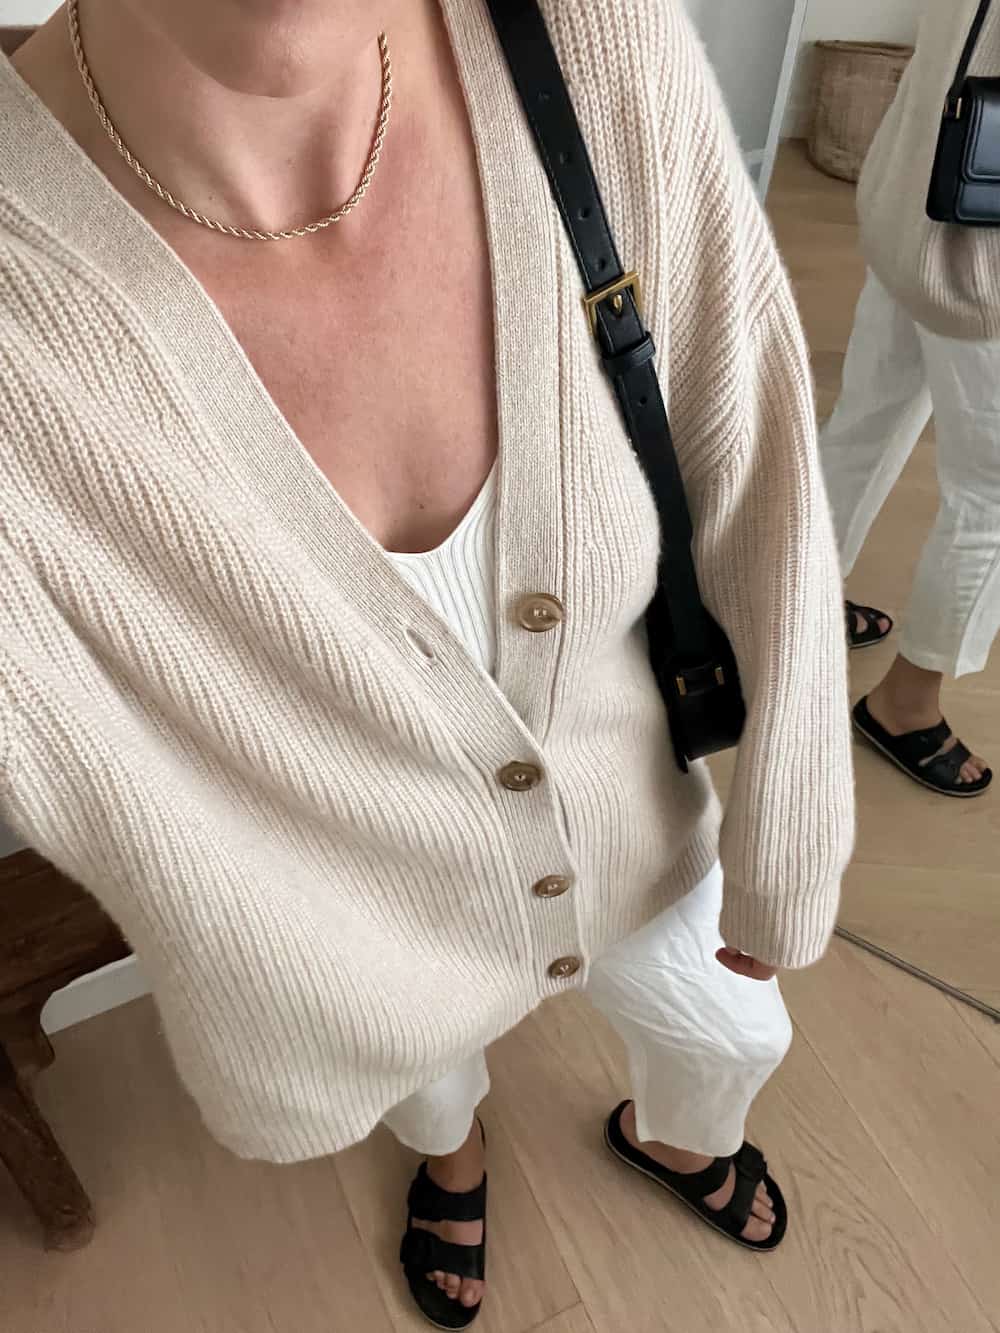 Christal wearing an oatmeal oversized cashmere cardigan from Jenni Kayne with white linen pants and black sandals